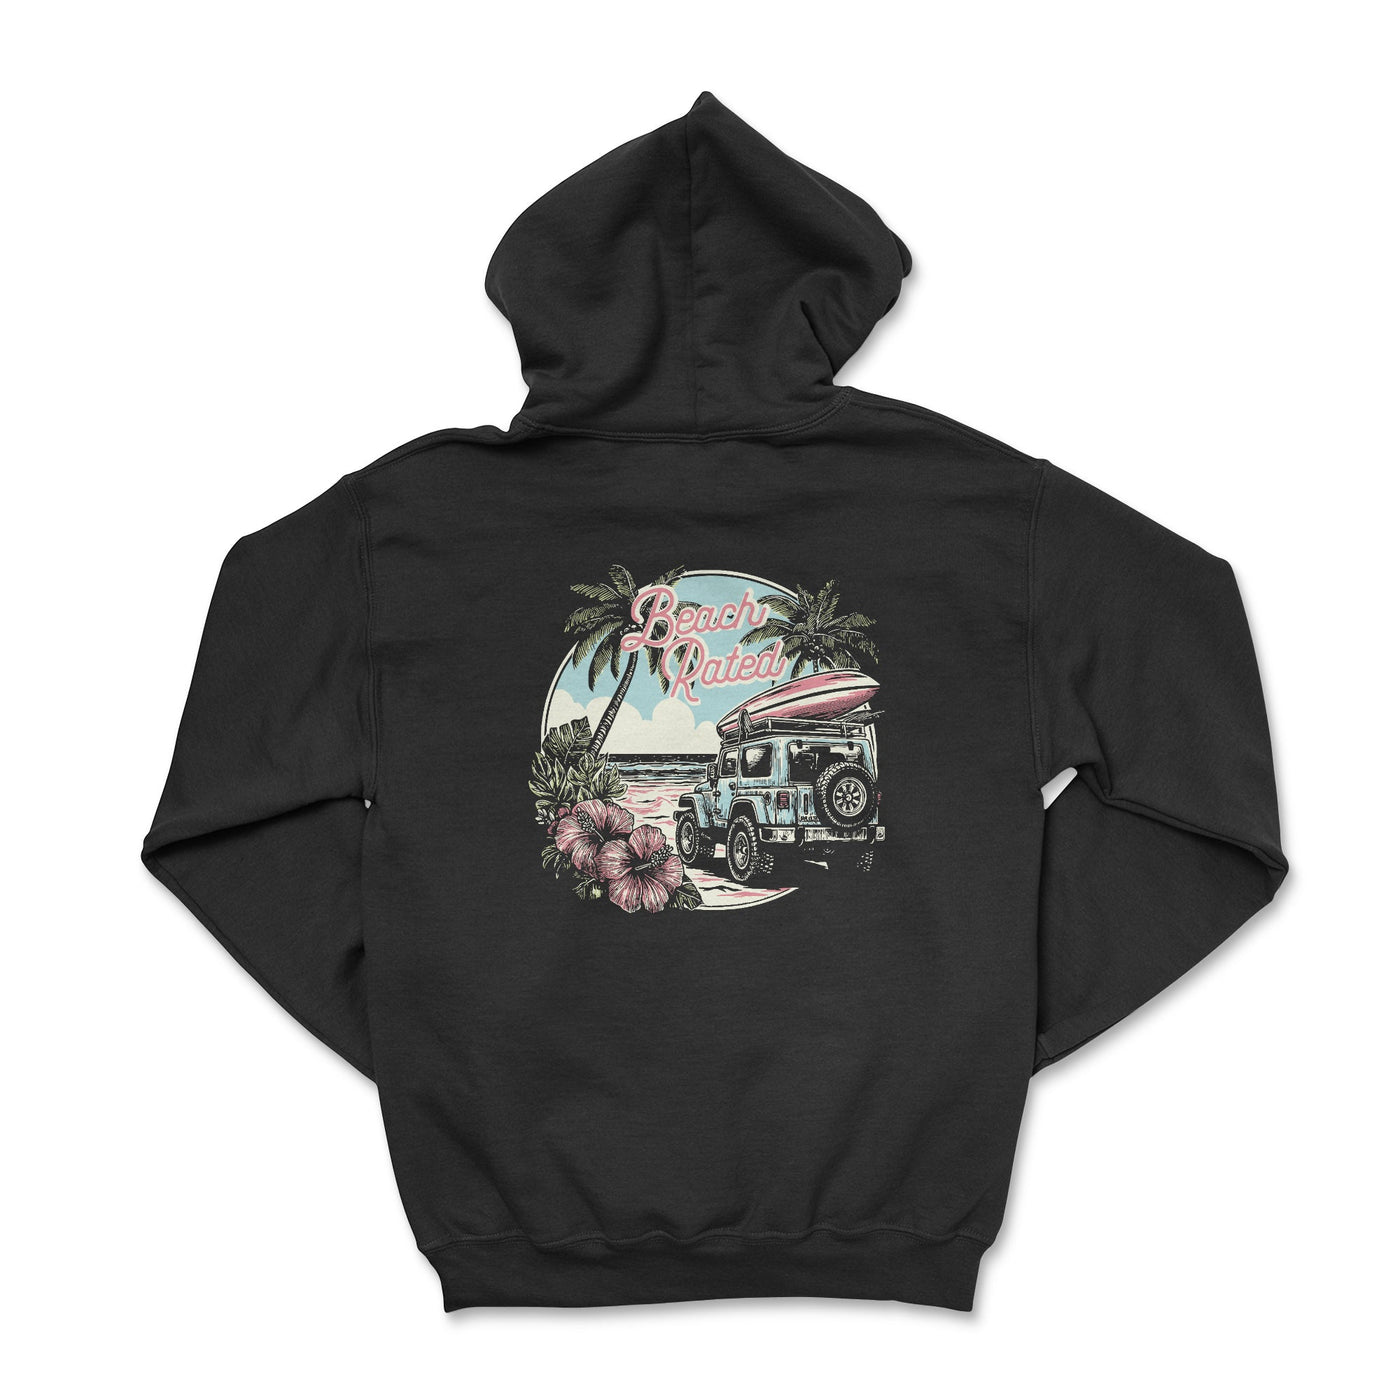 Beach Rated Zip-Up Hoodie - Goats Trail Off-Road Apparel Company